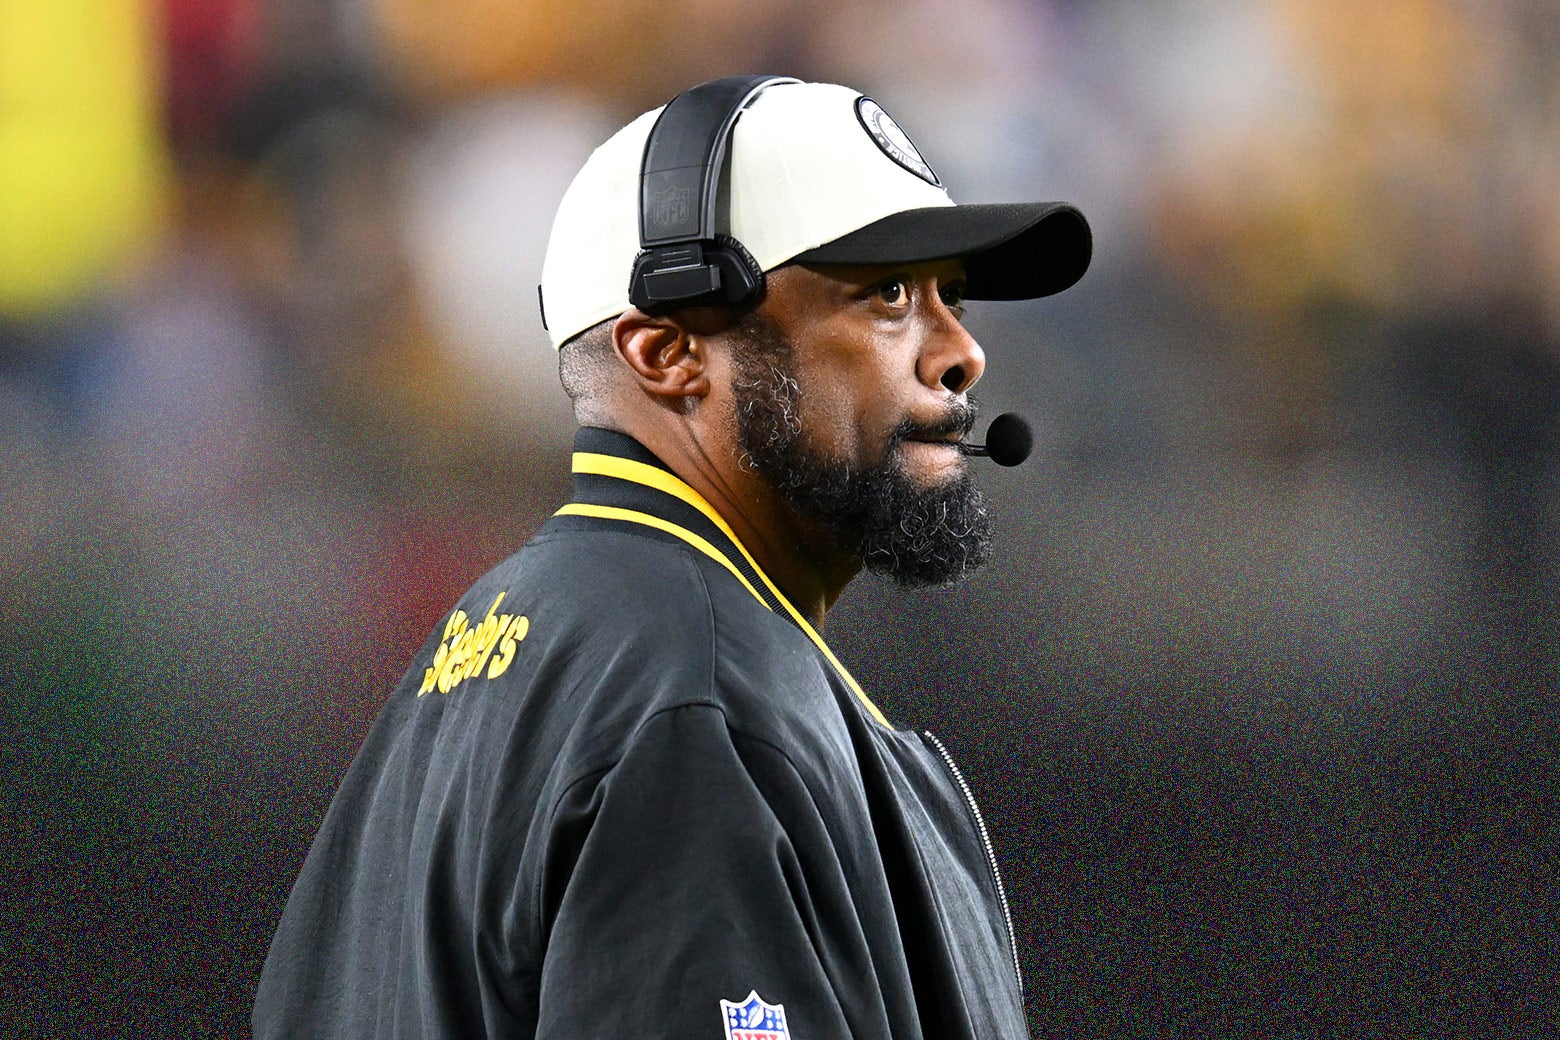 Steelers coach Mike Tomlin looking worried on the sideline, in a white cap and headset and Steelers jacket, pursing his lips and looking upward.